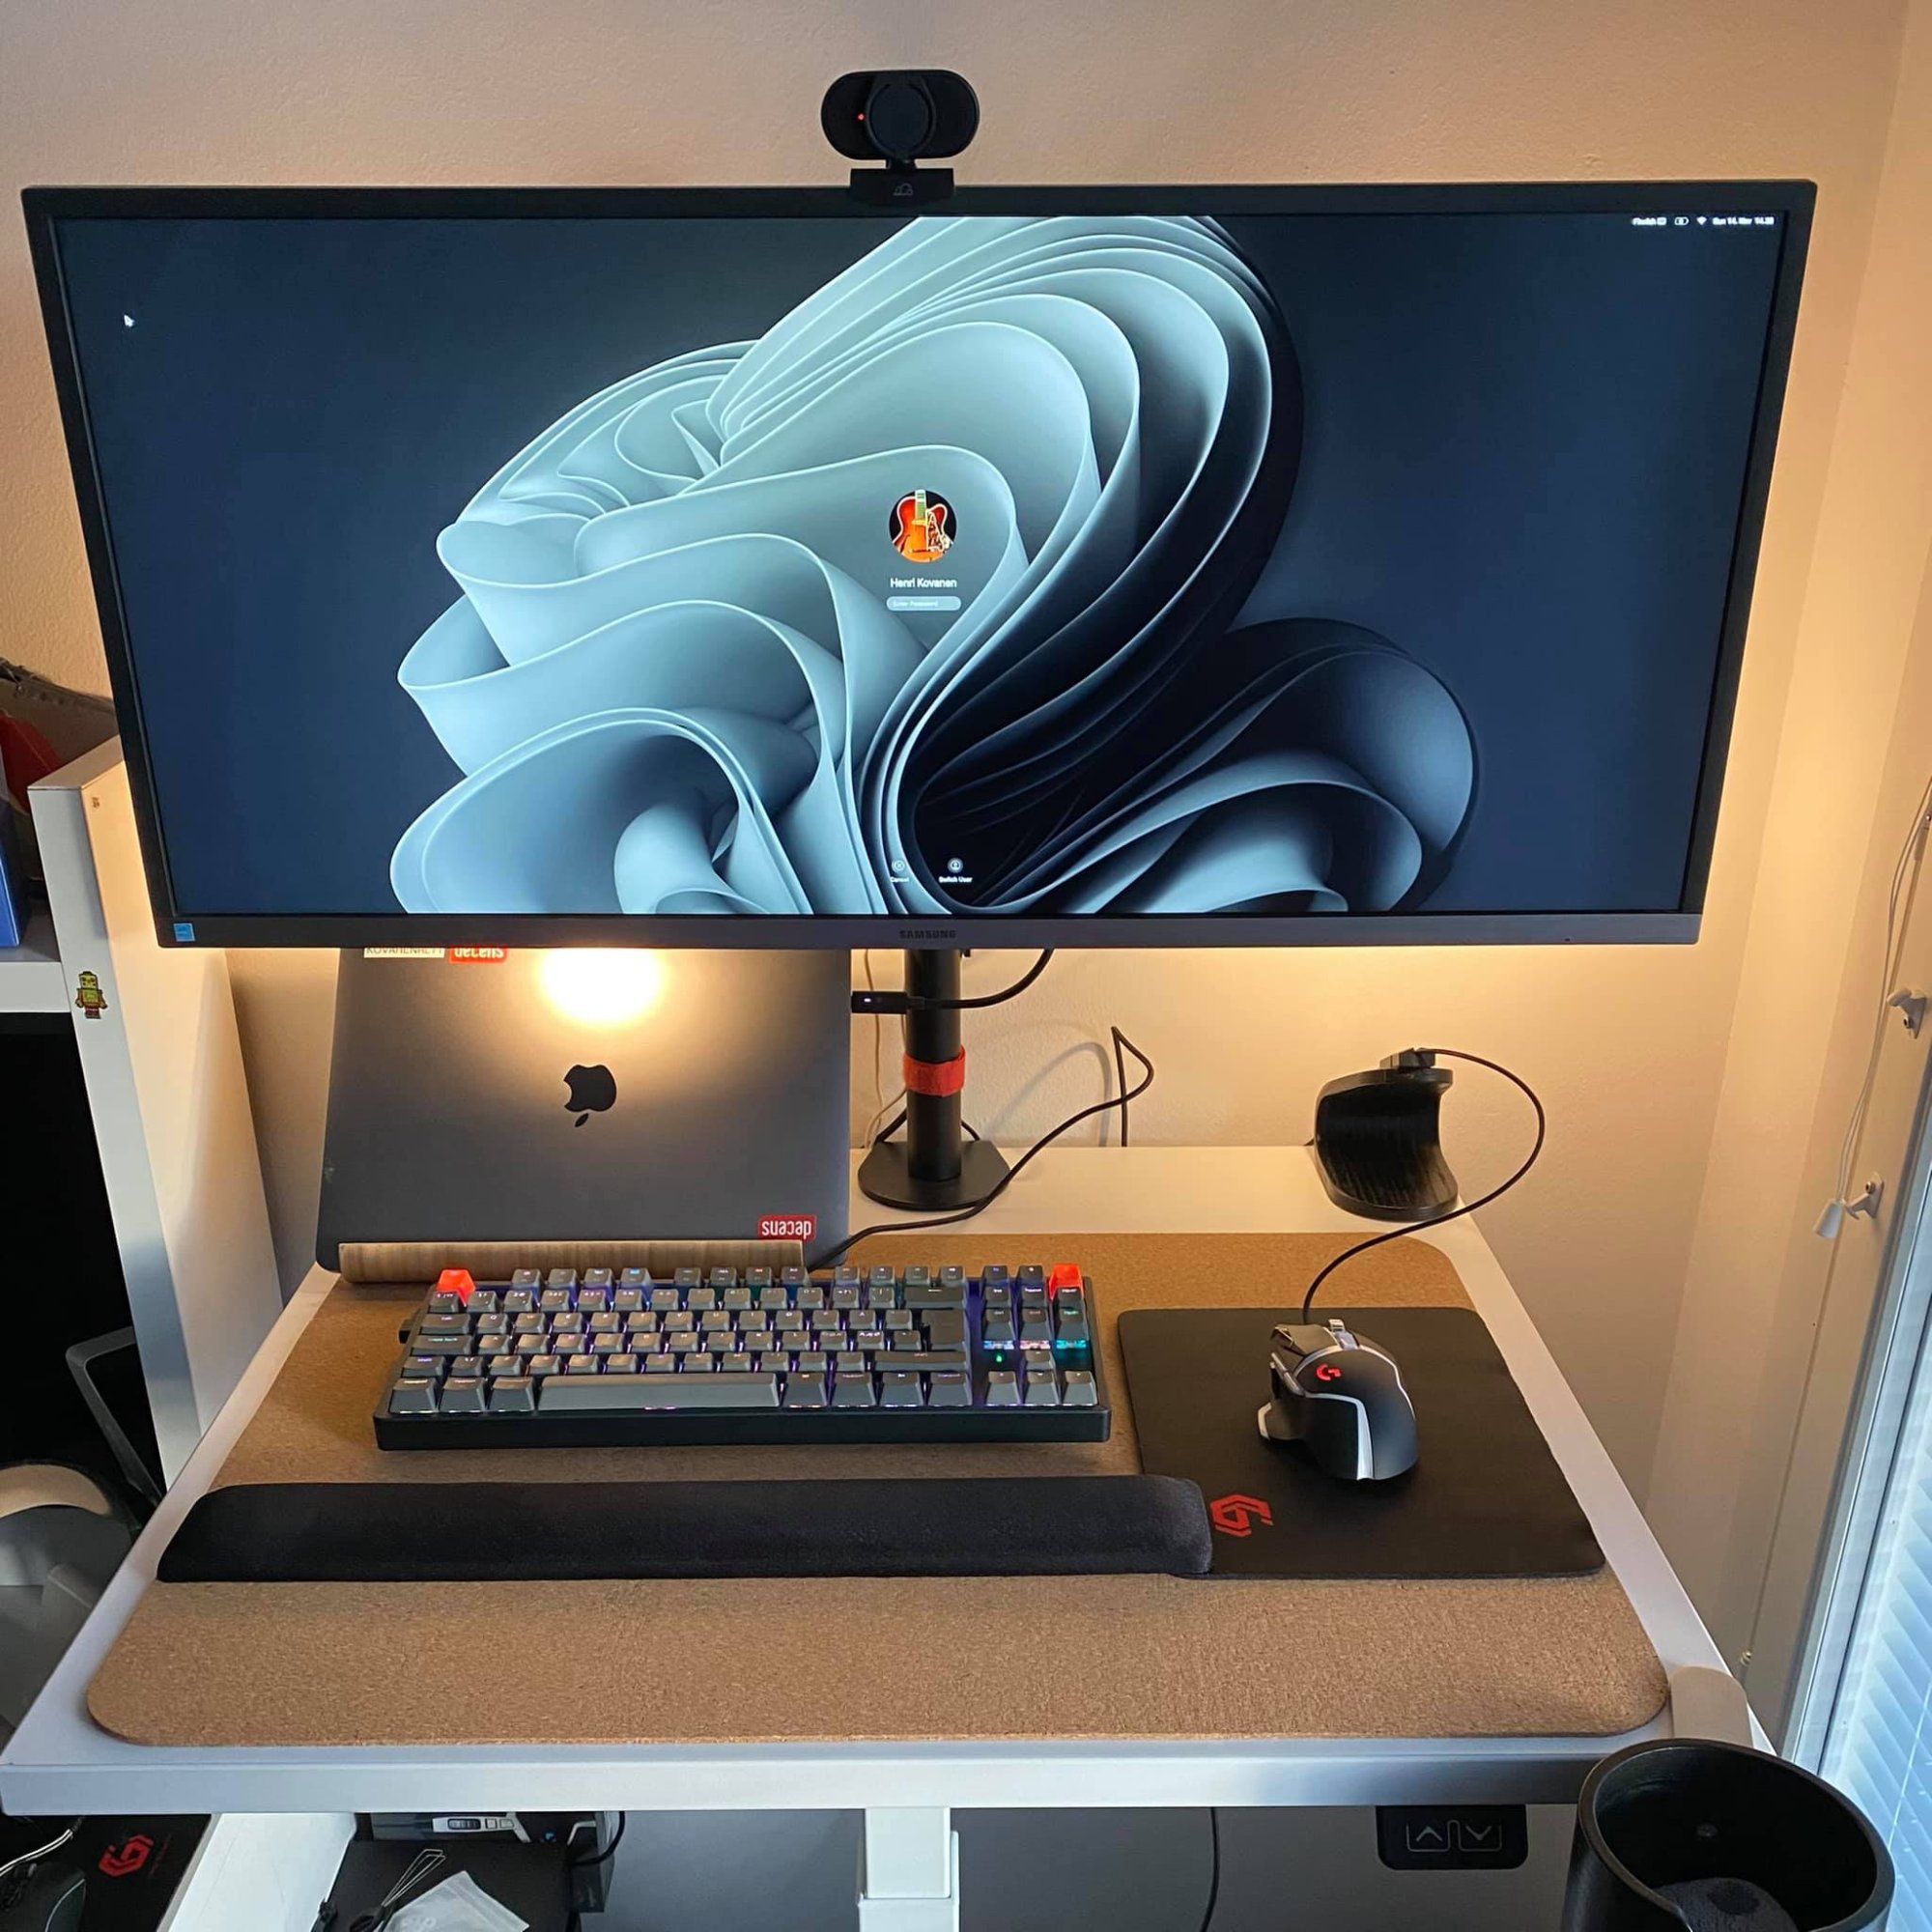 An IKEA desk setup in a small space